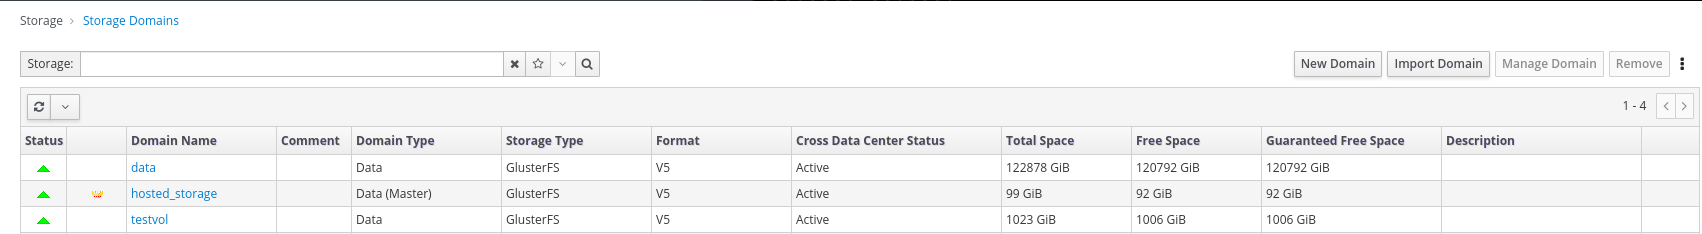 Administration Console storage domain dashboard